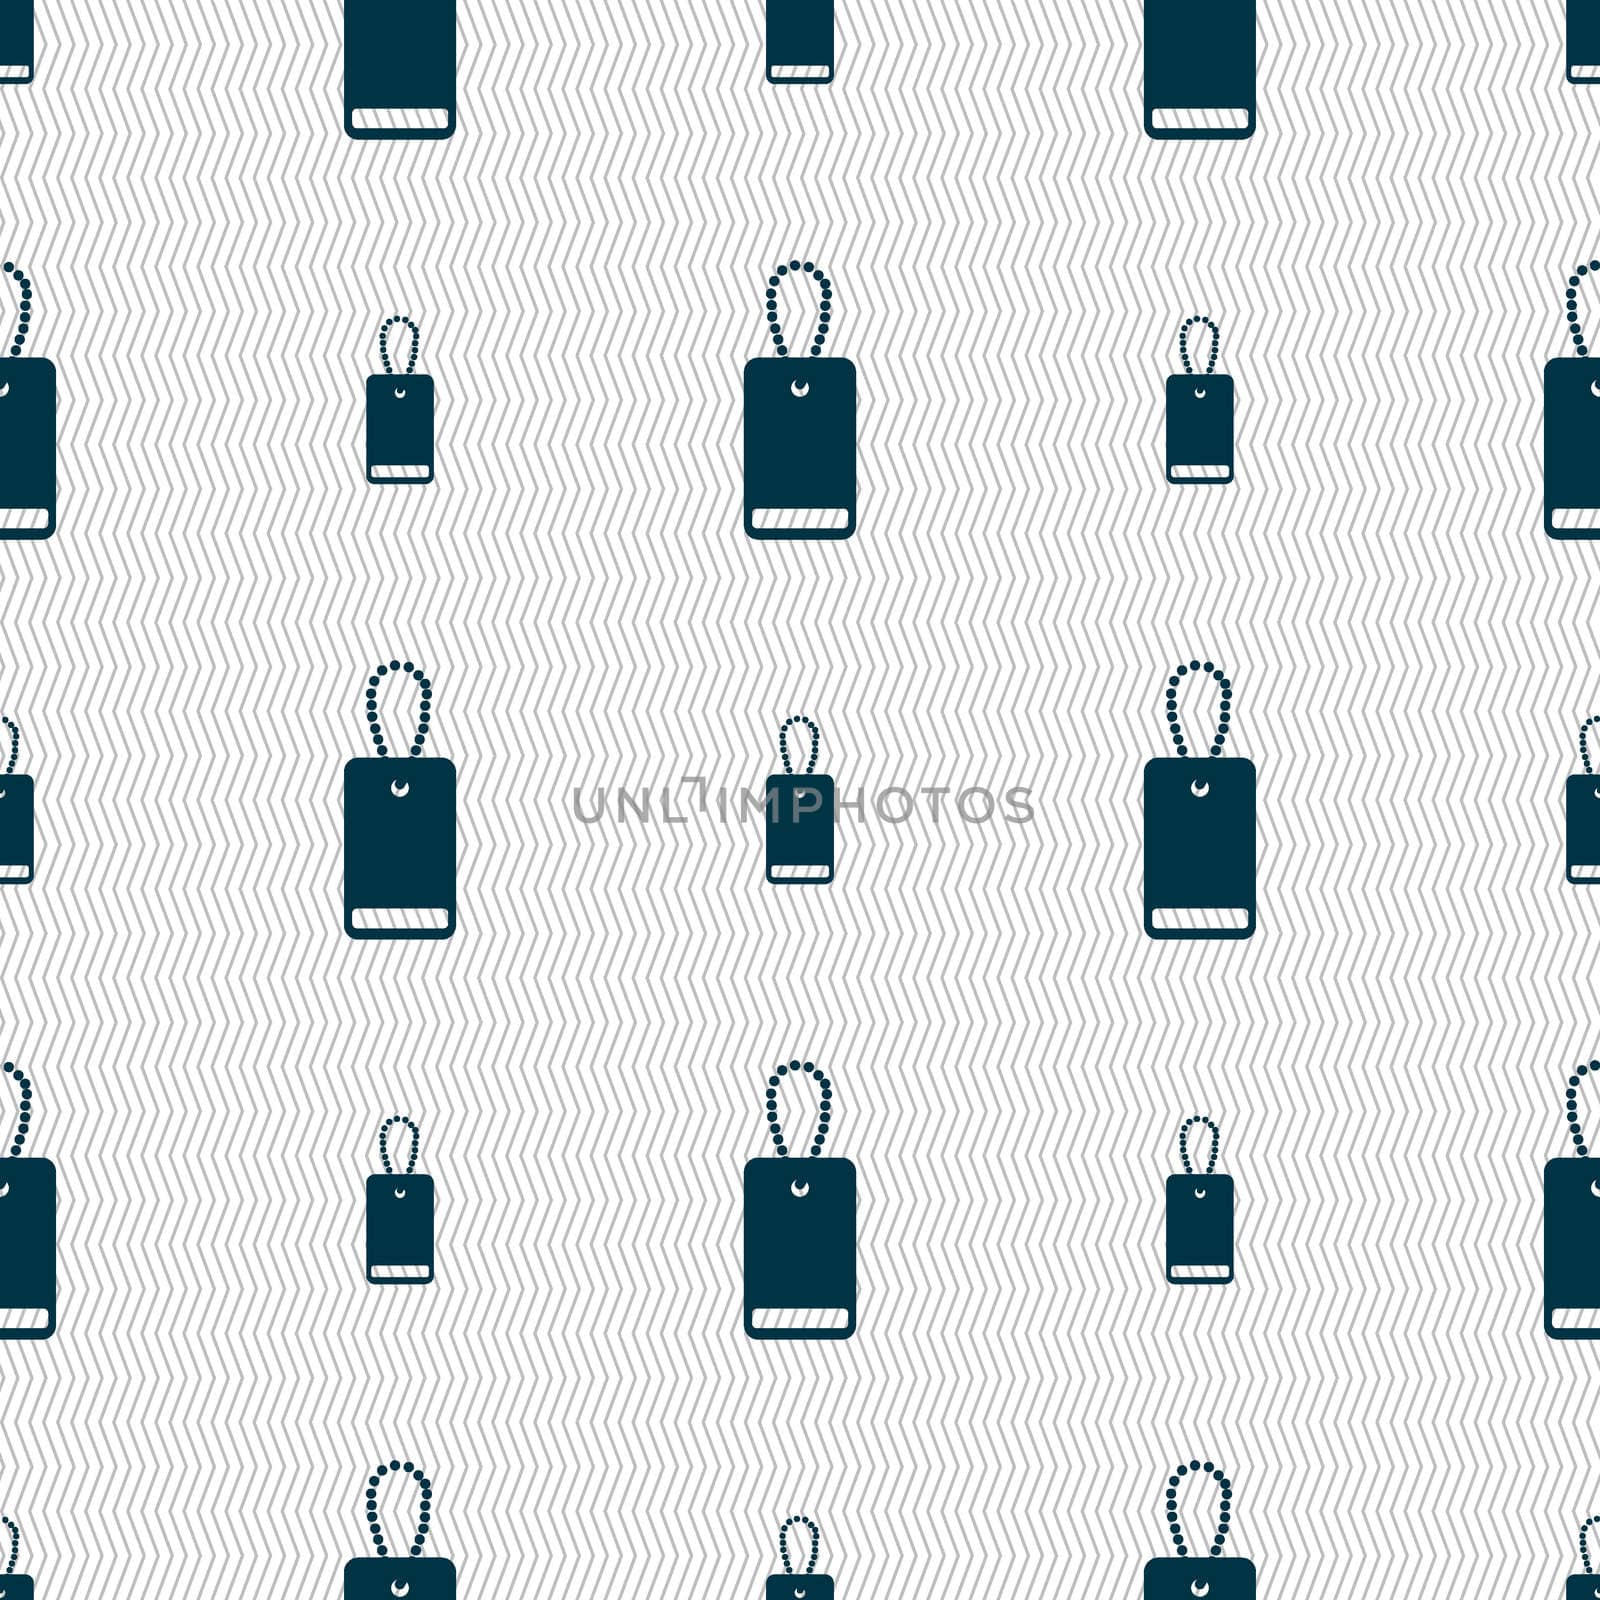 army chains icon sign. Seamless abstract background with geometric shapes. illustration